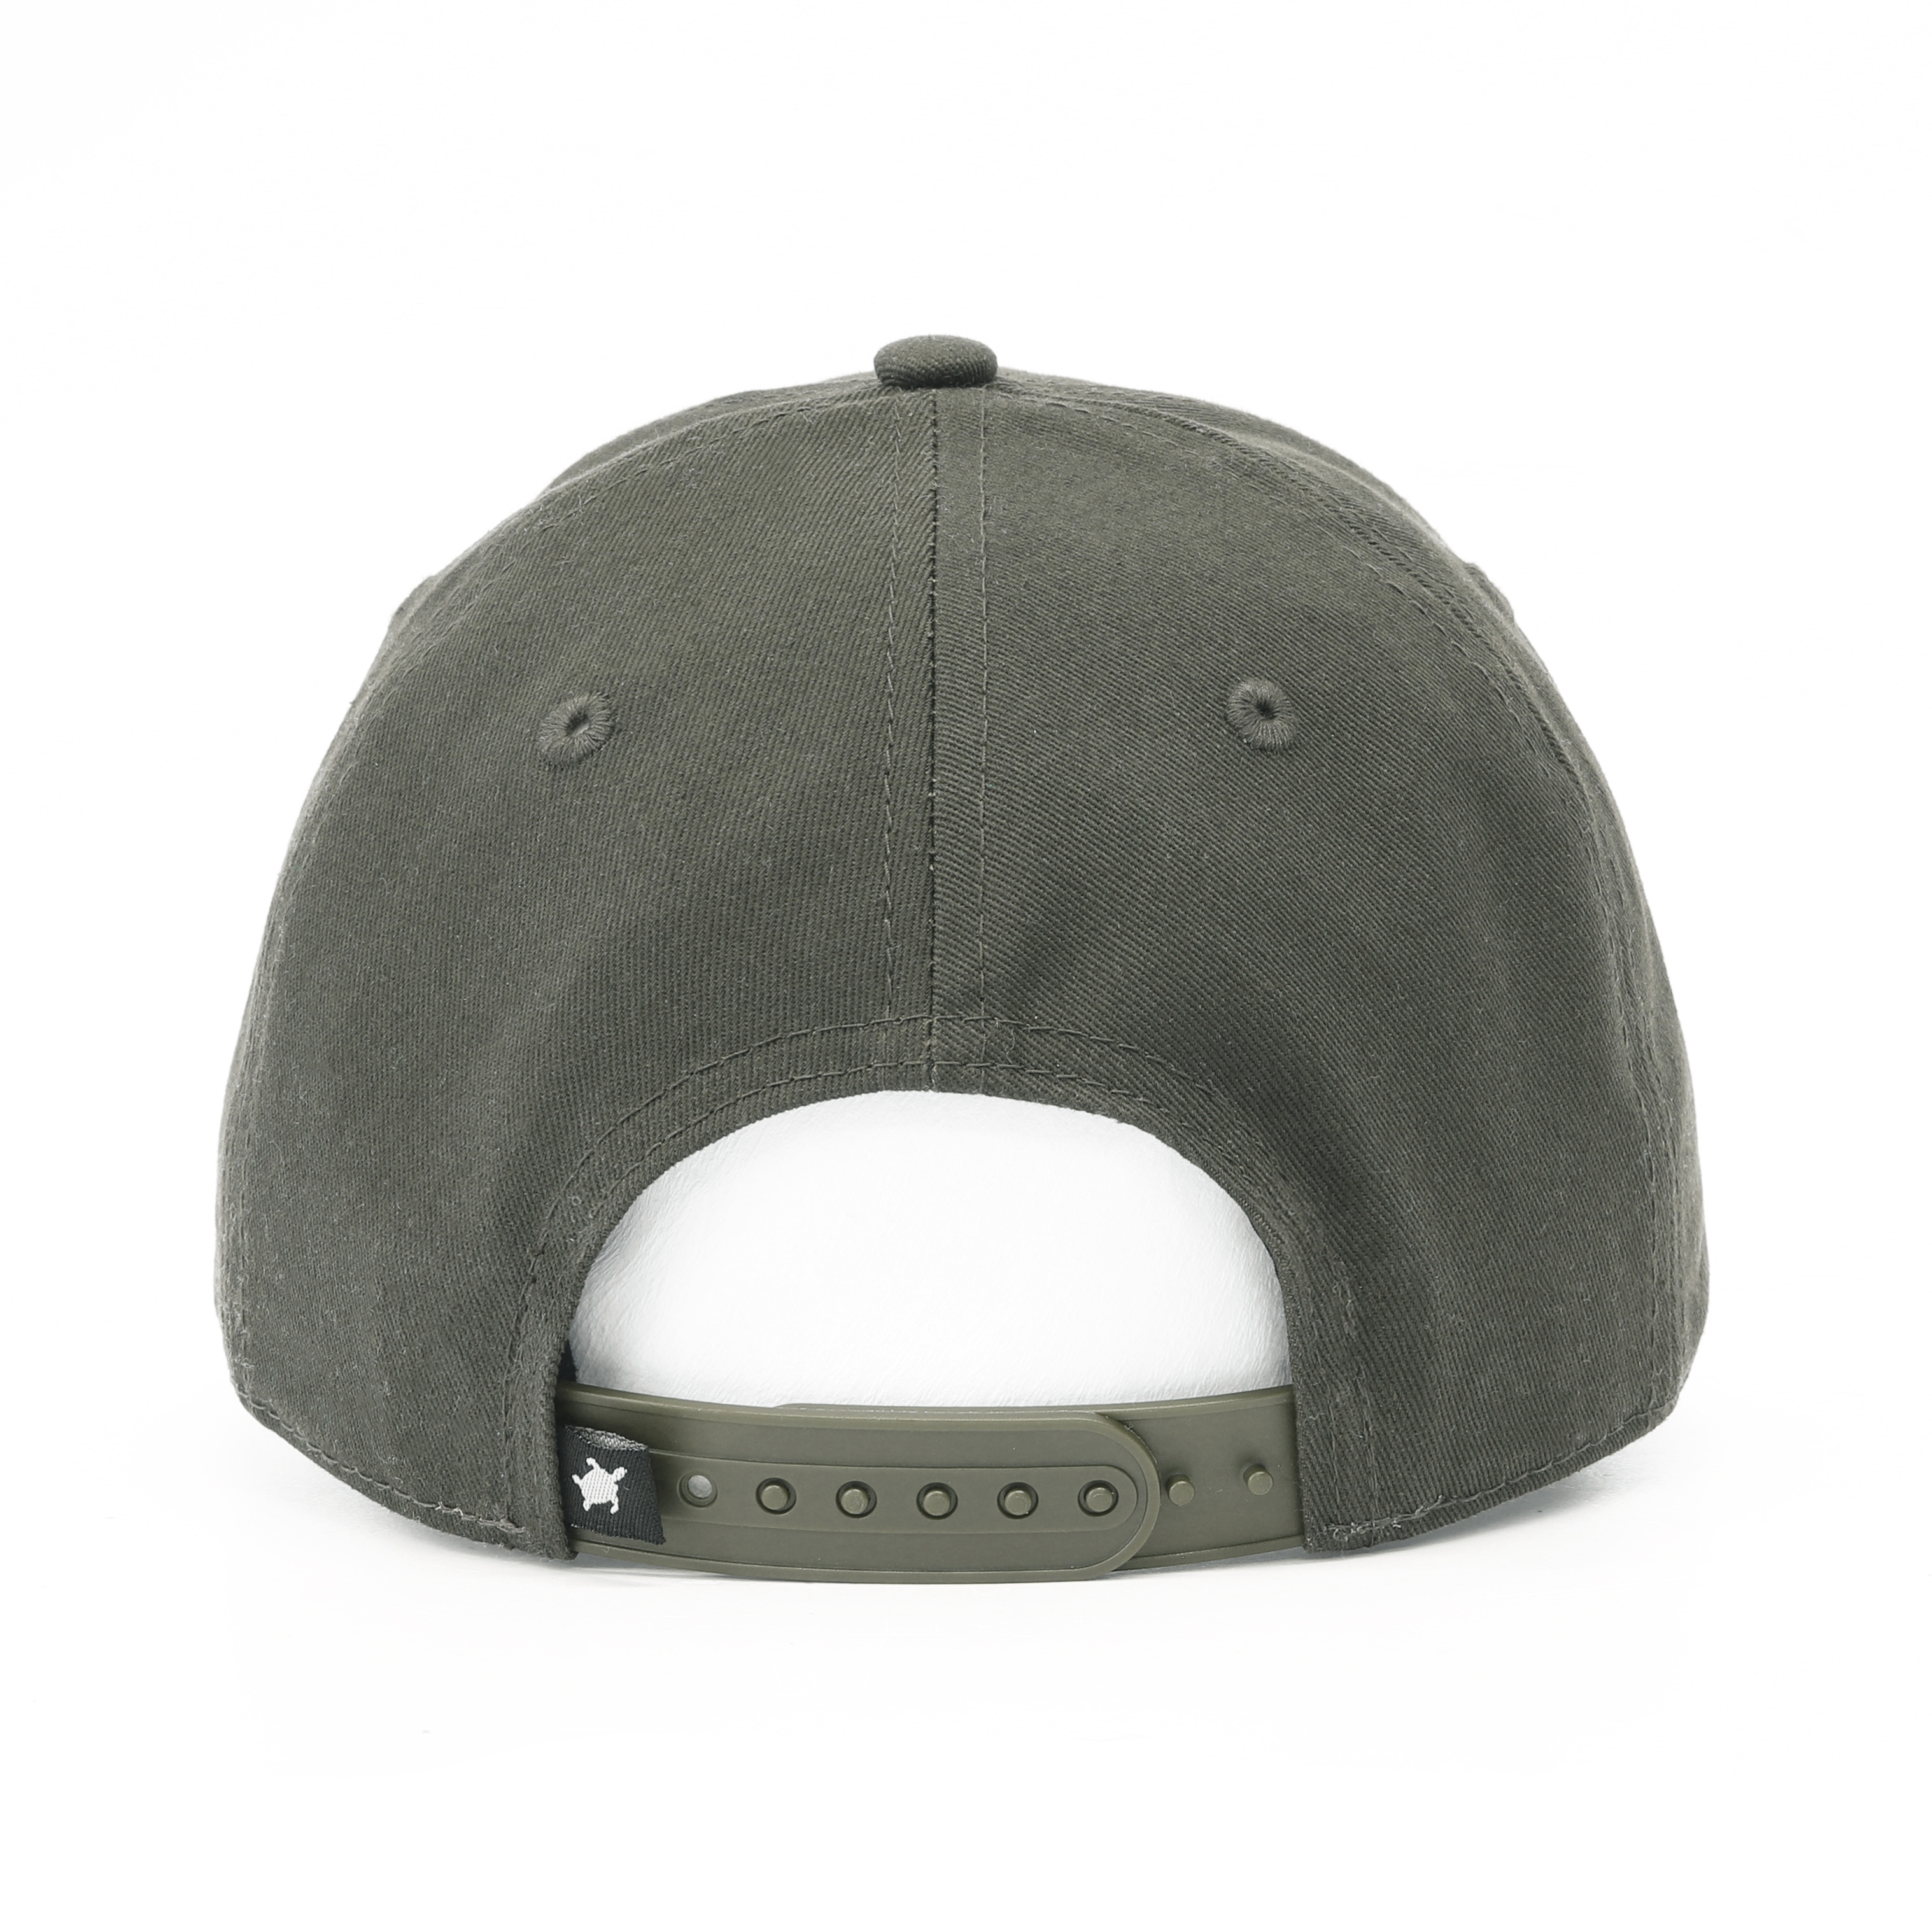 Smith & Miller Odesa Unisex Curved Cap, olive